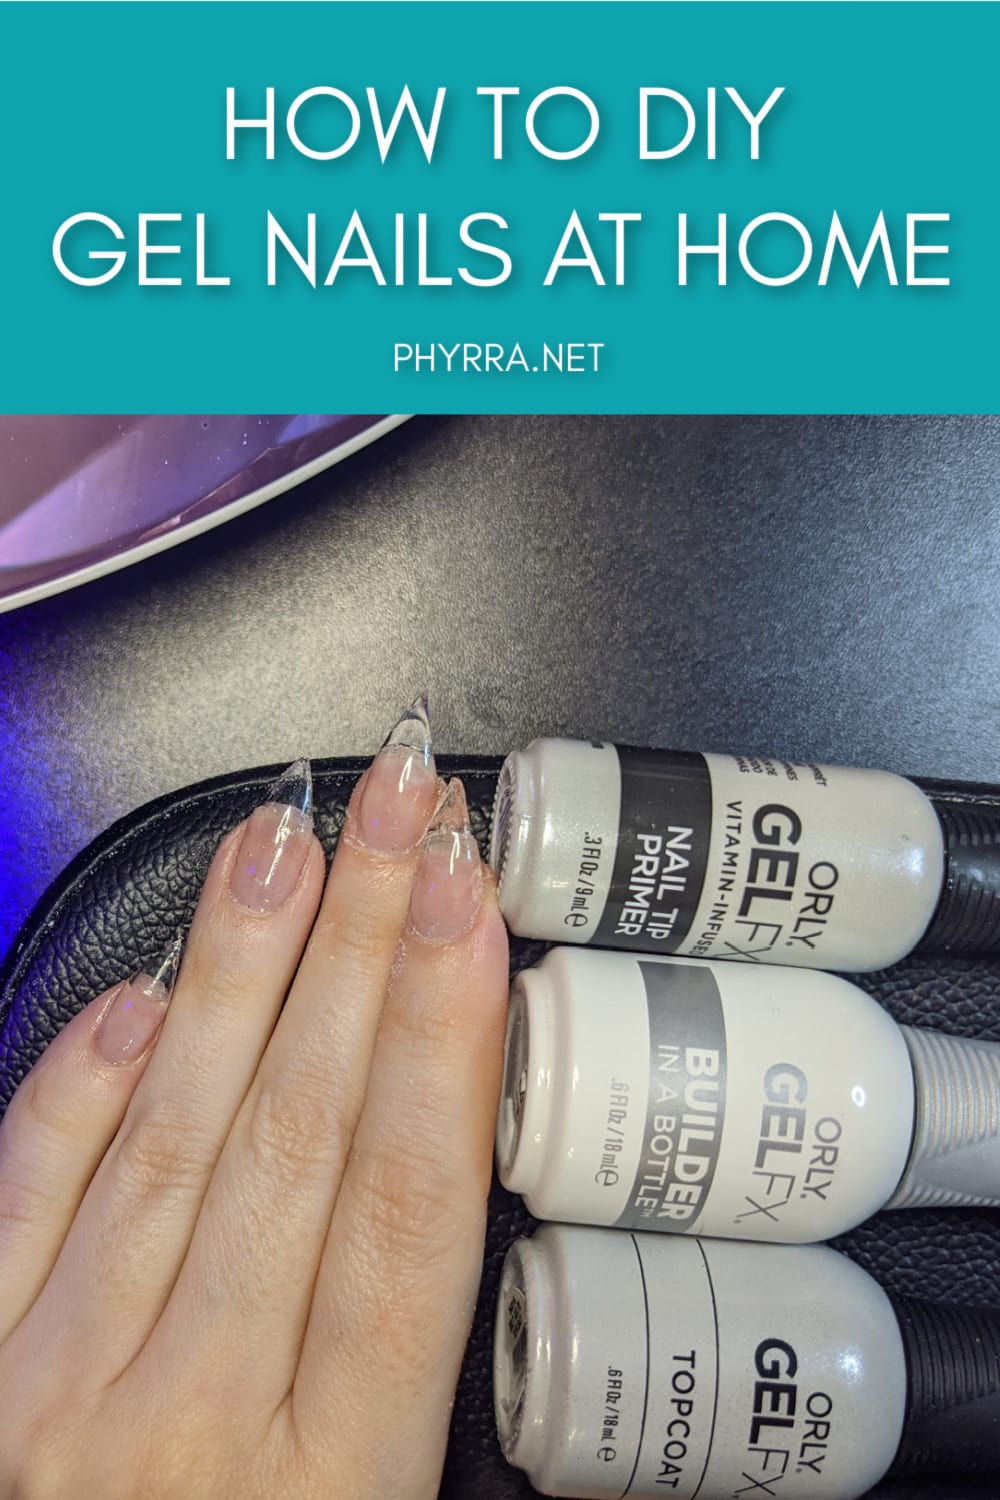 How to DIY Gel Nails at Home - A great video tutorial for beginners